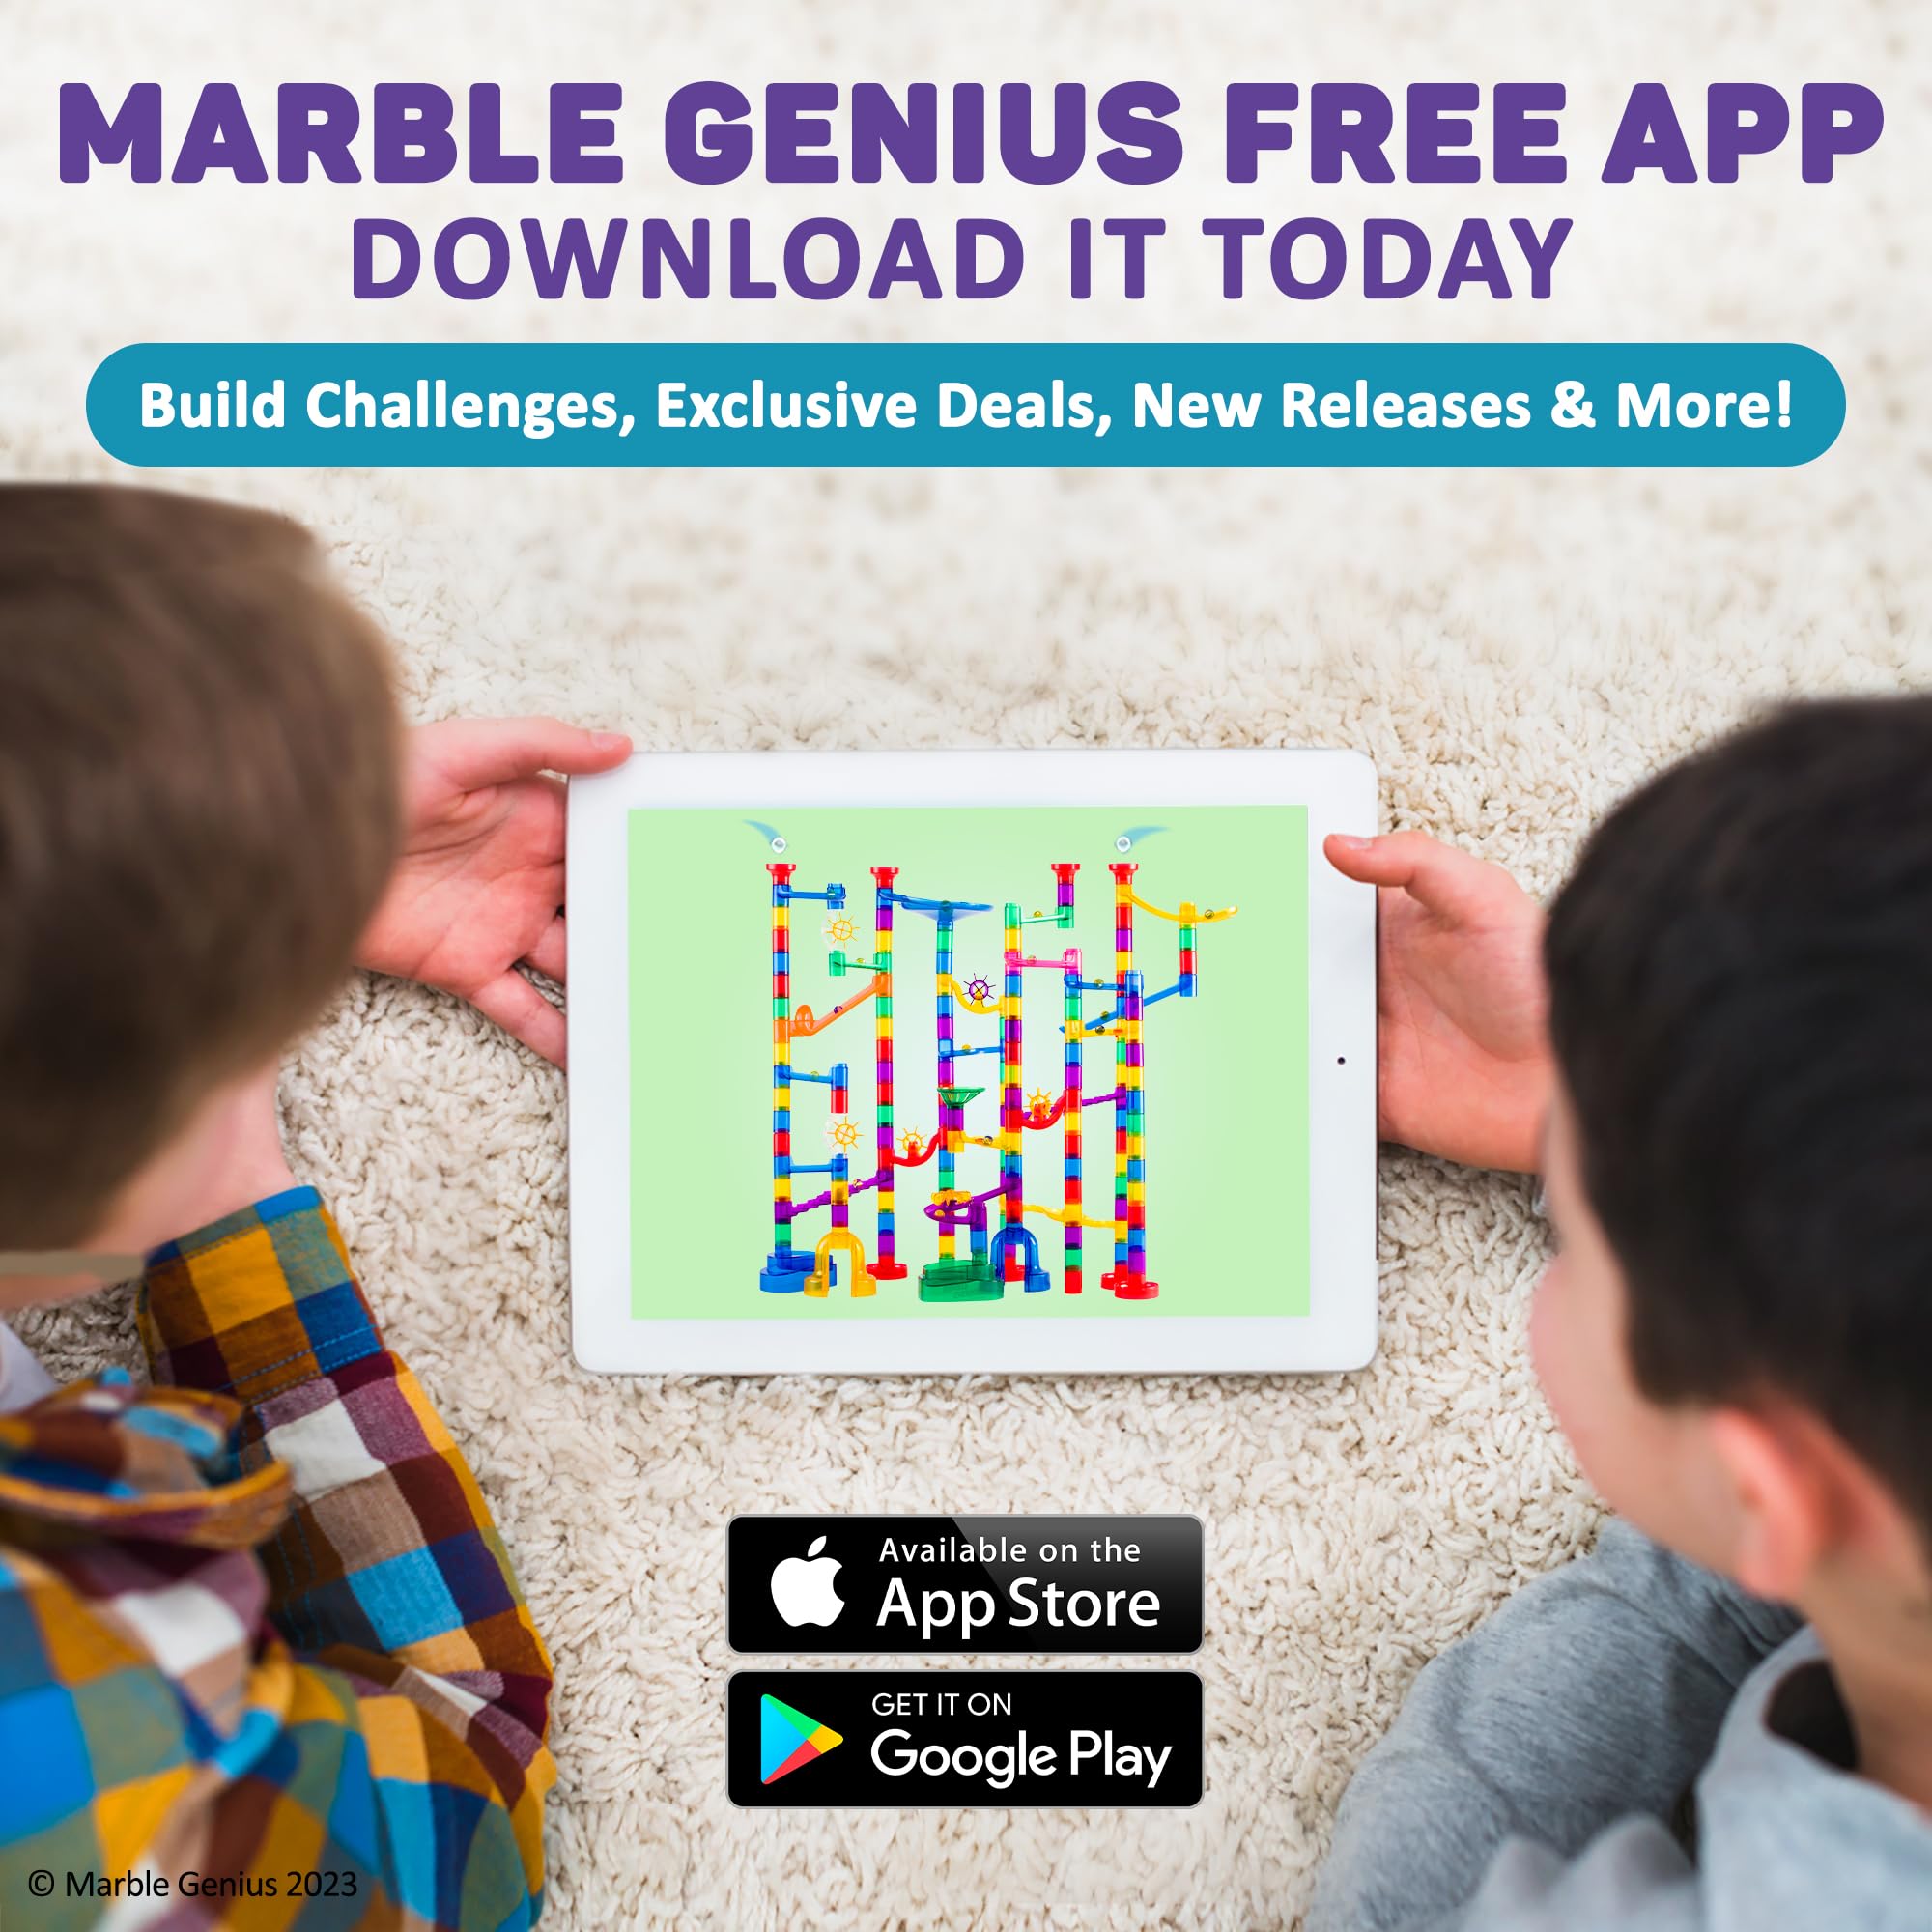 Marble Genius Bundle: Marble Run Booster Set (30 Pieces), Tubes Accessory (30 Pieces), Pipes & Spheres Accessory (10 Pieces), STEM Building & Learning Educational Construction